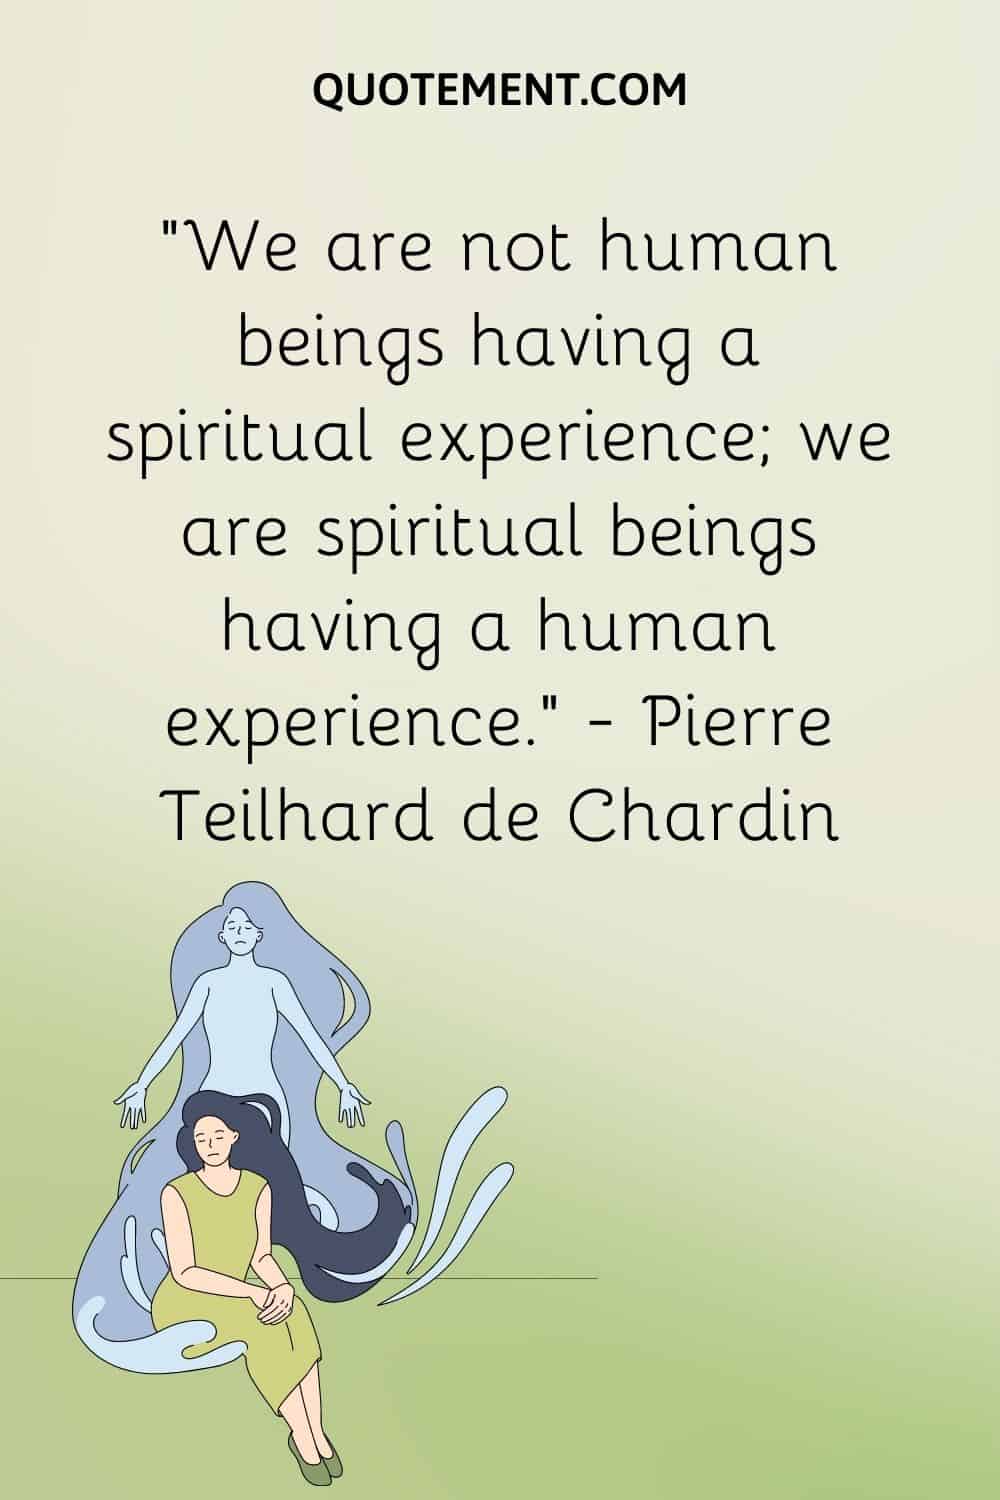 We are not human beings having a spiritual experience